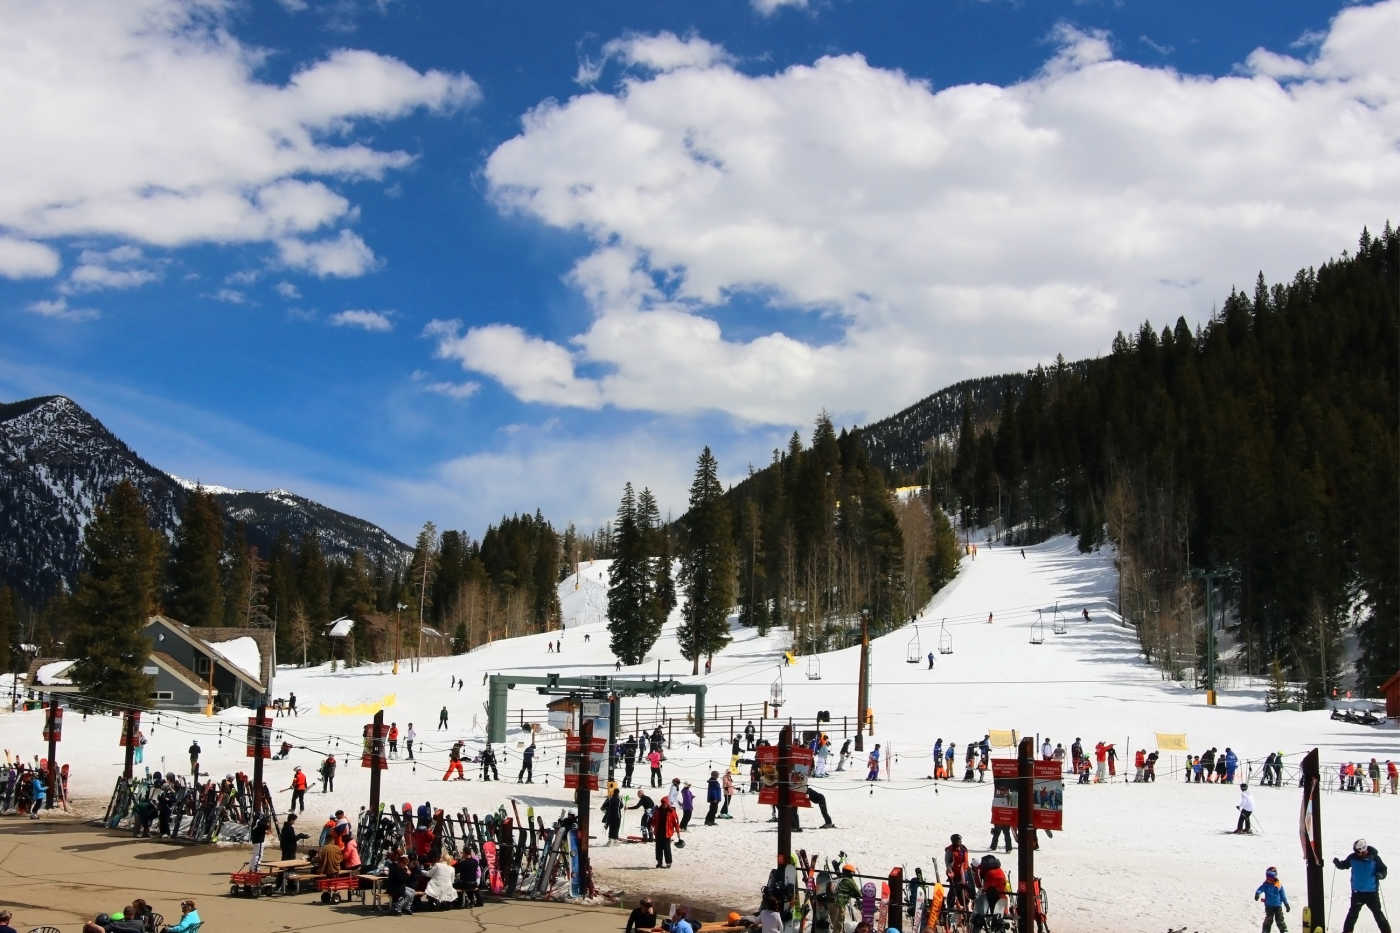 KEYSTONE SKI RESORT: BEST AND WORST THINGS ABOUT SPRING SKIING